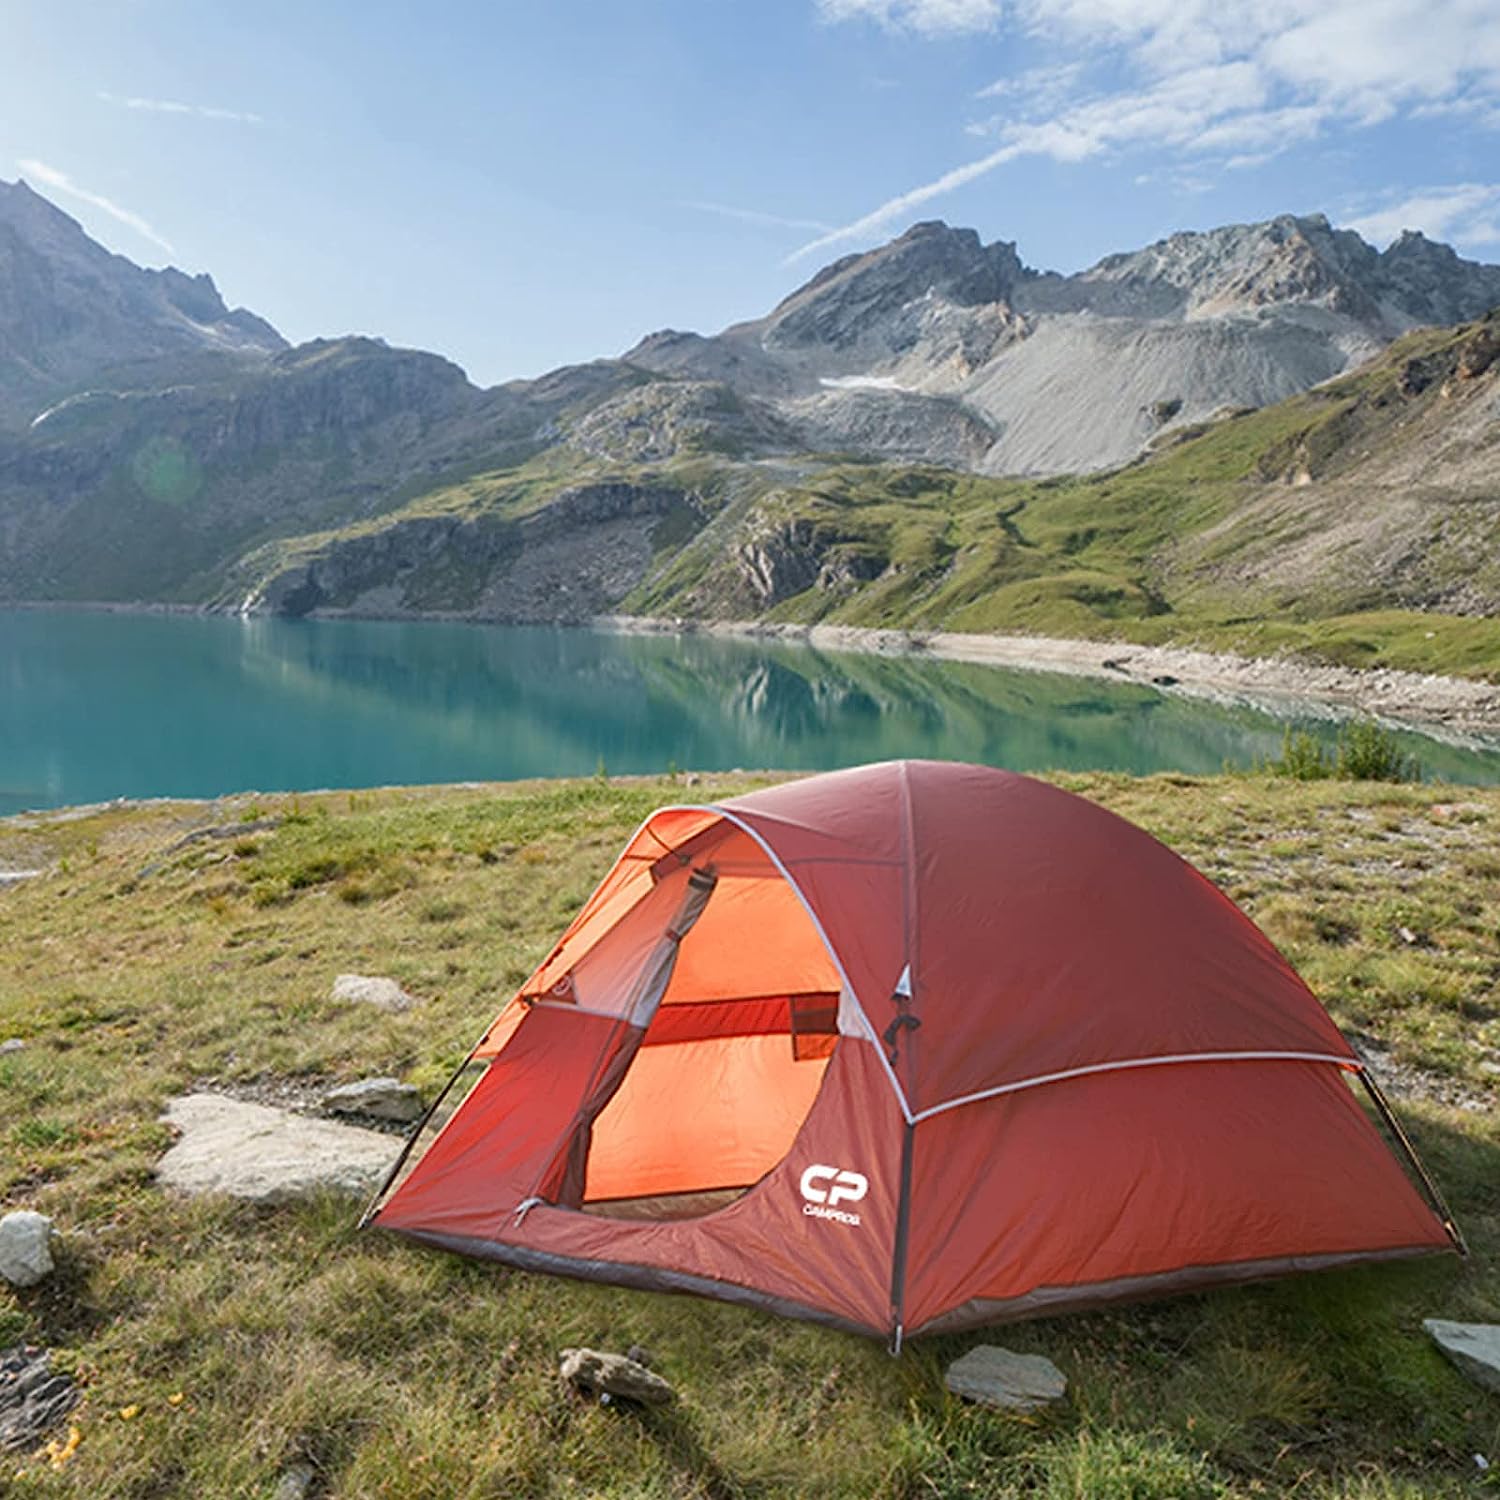 campros dome tent for camping outside